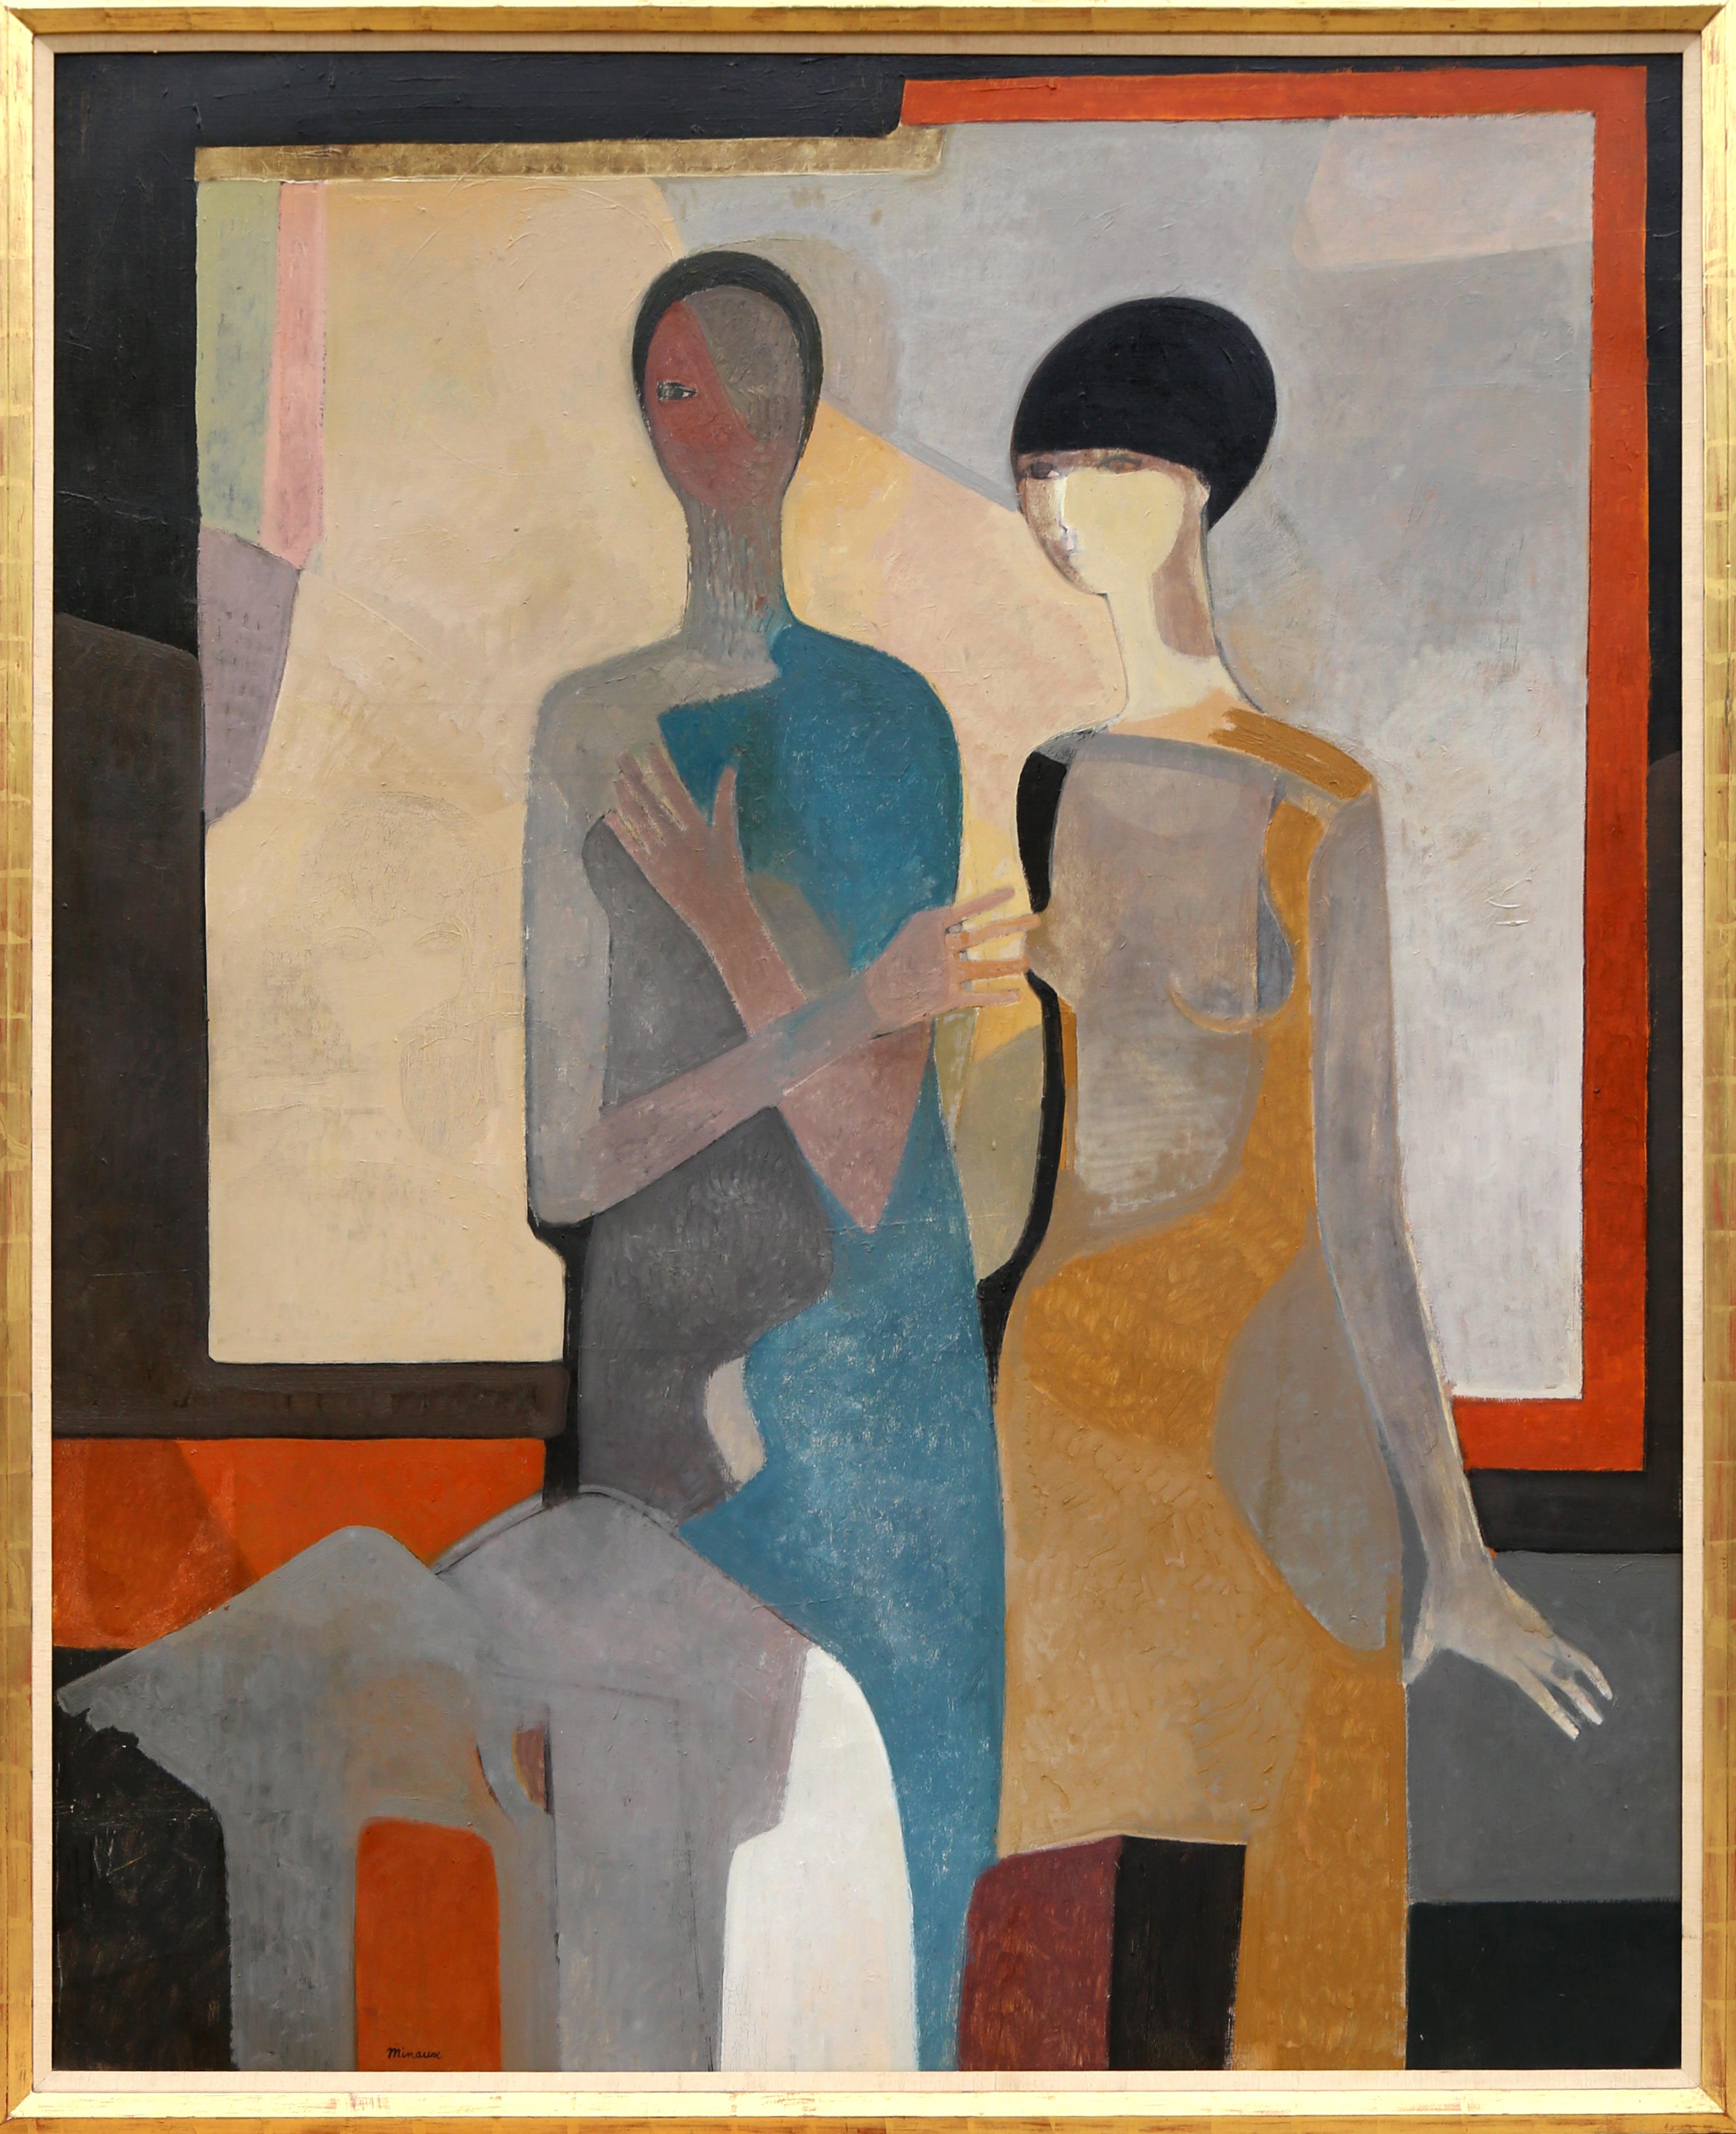 André Minaux Figurative Painting - Two Women in Interior, Modern Cubist Painting by Andre Minaux